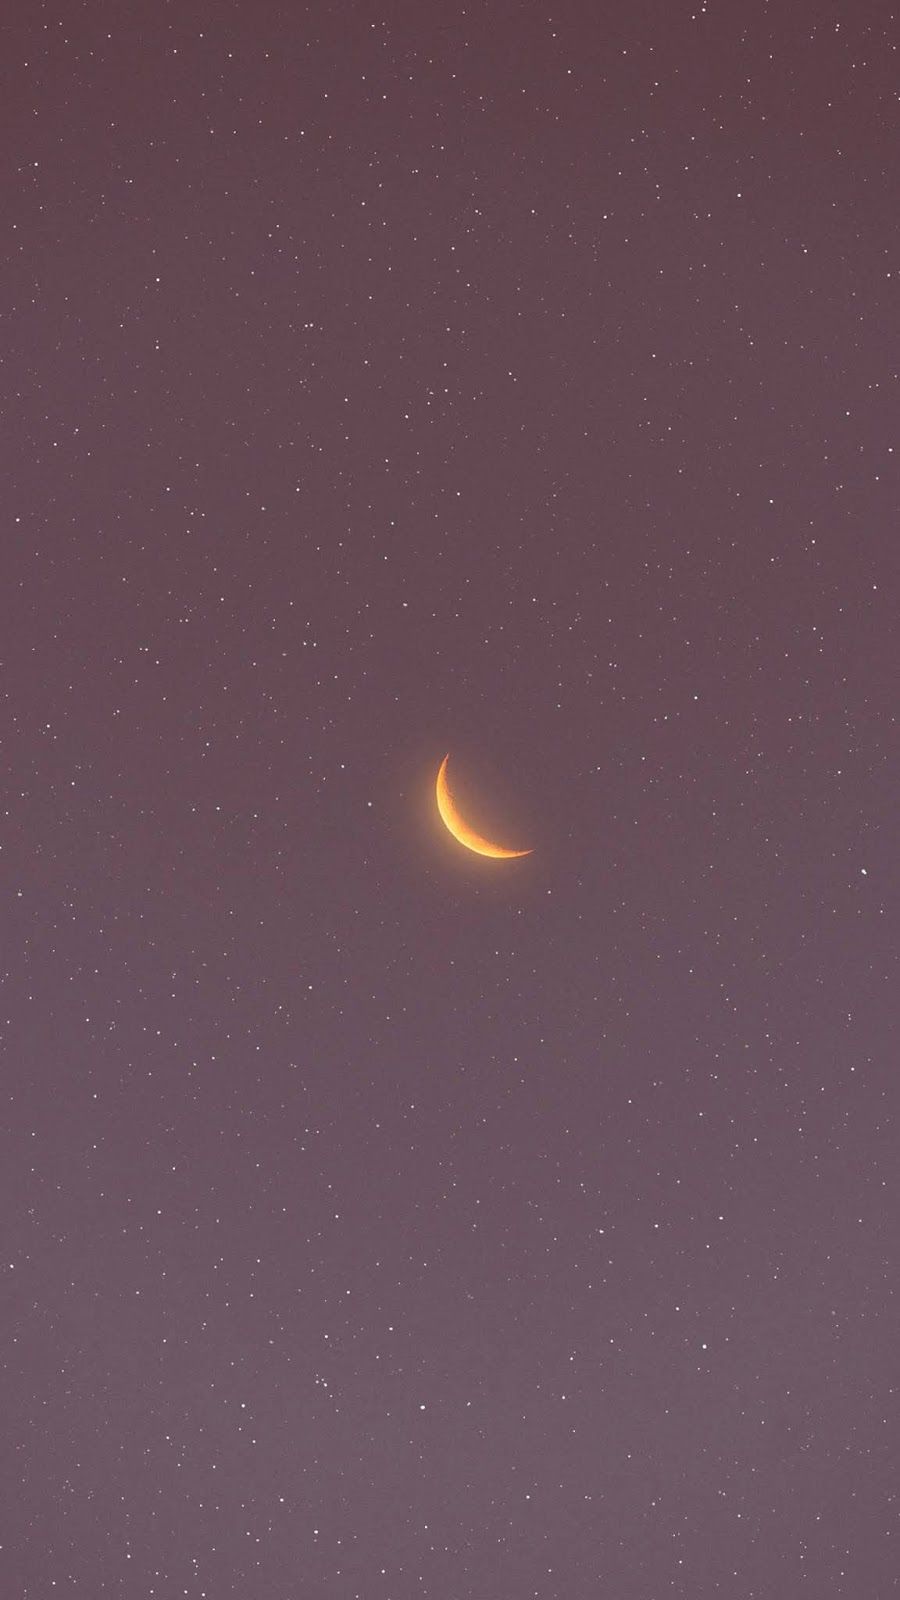 Crescent moon in the pink sky